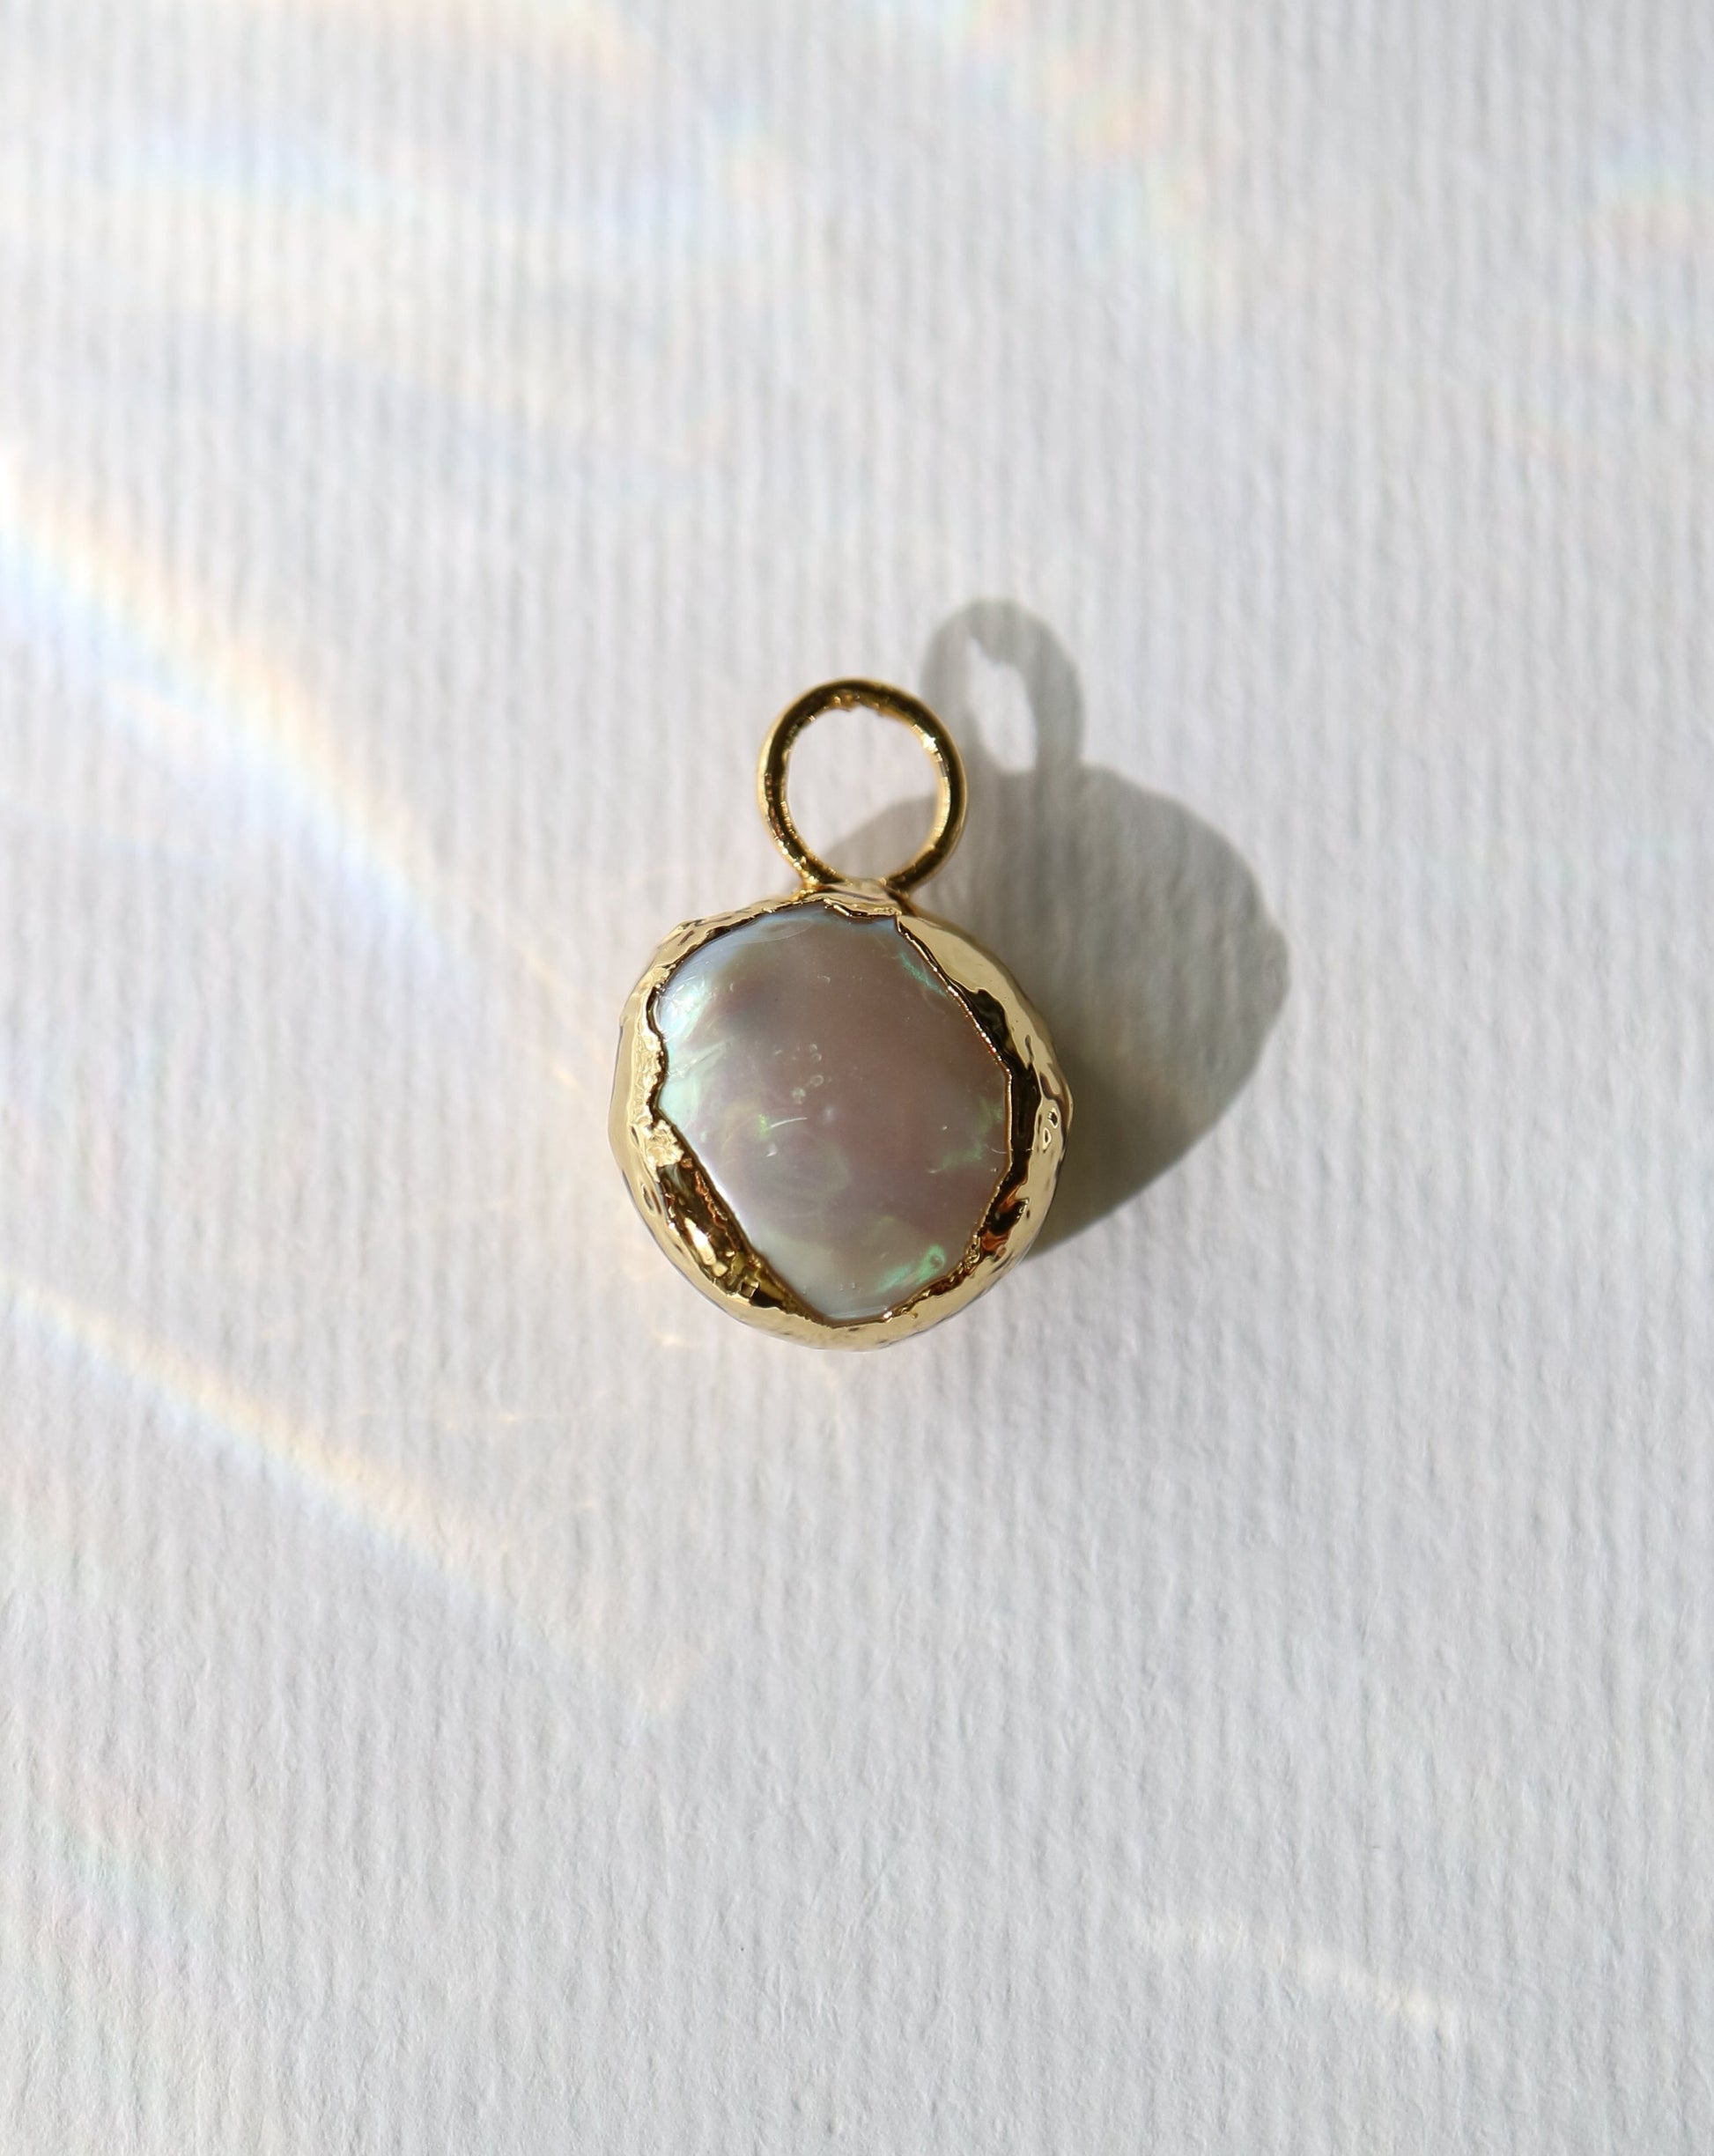 Oyster Pearl Charm for jewellery